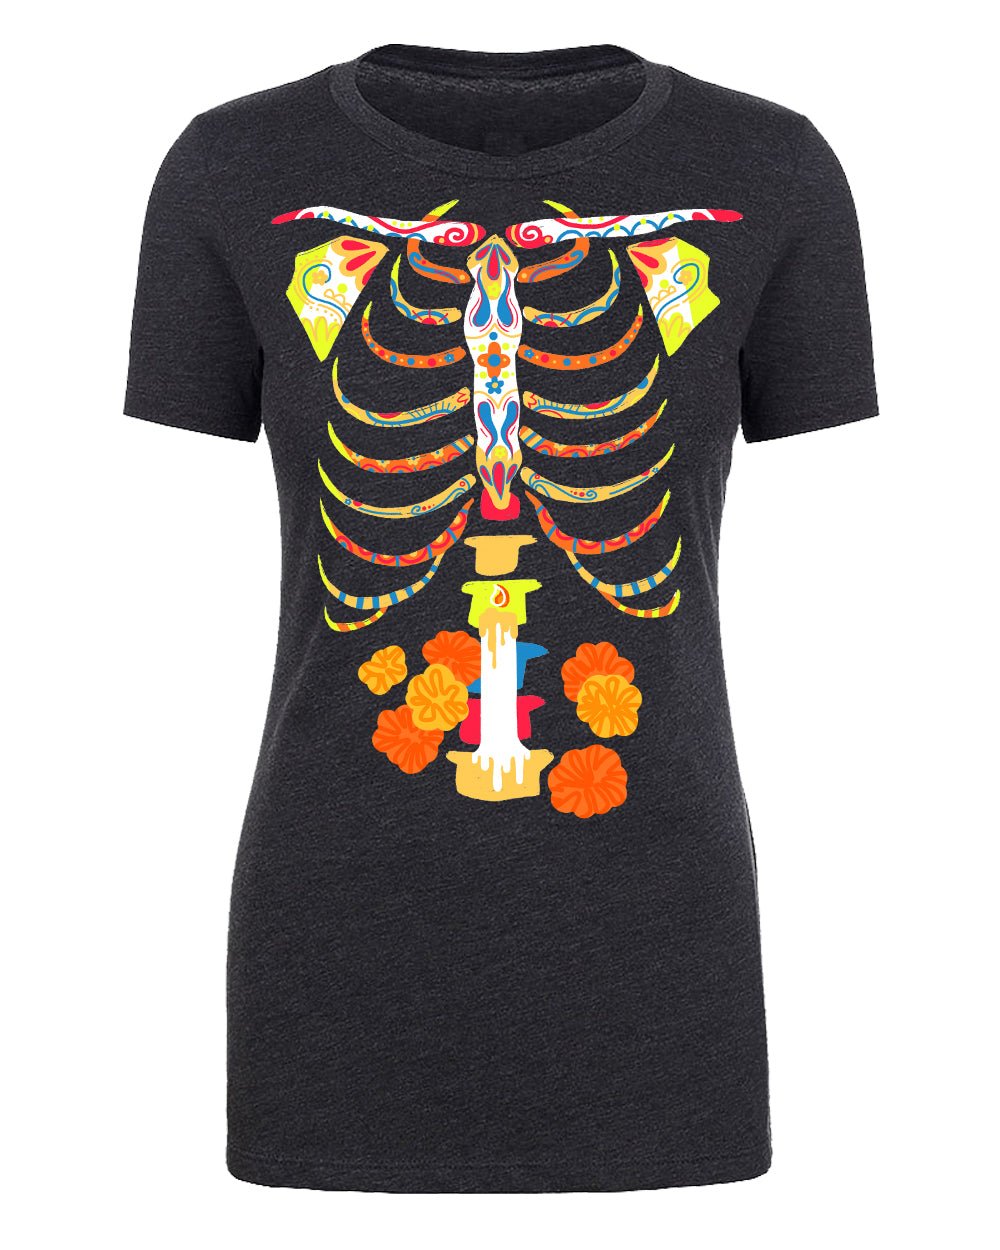 Day of the Dead Halloween Skeleton Womens T Shirts - Mato & Hash